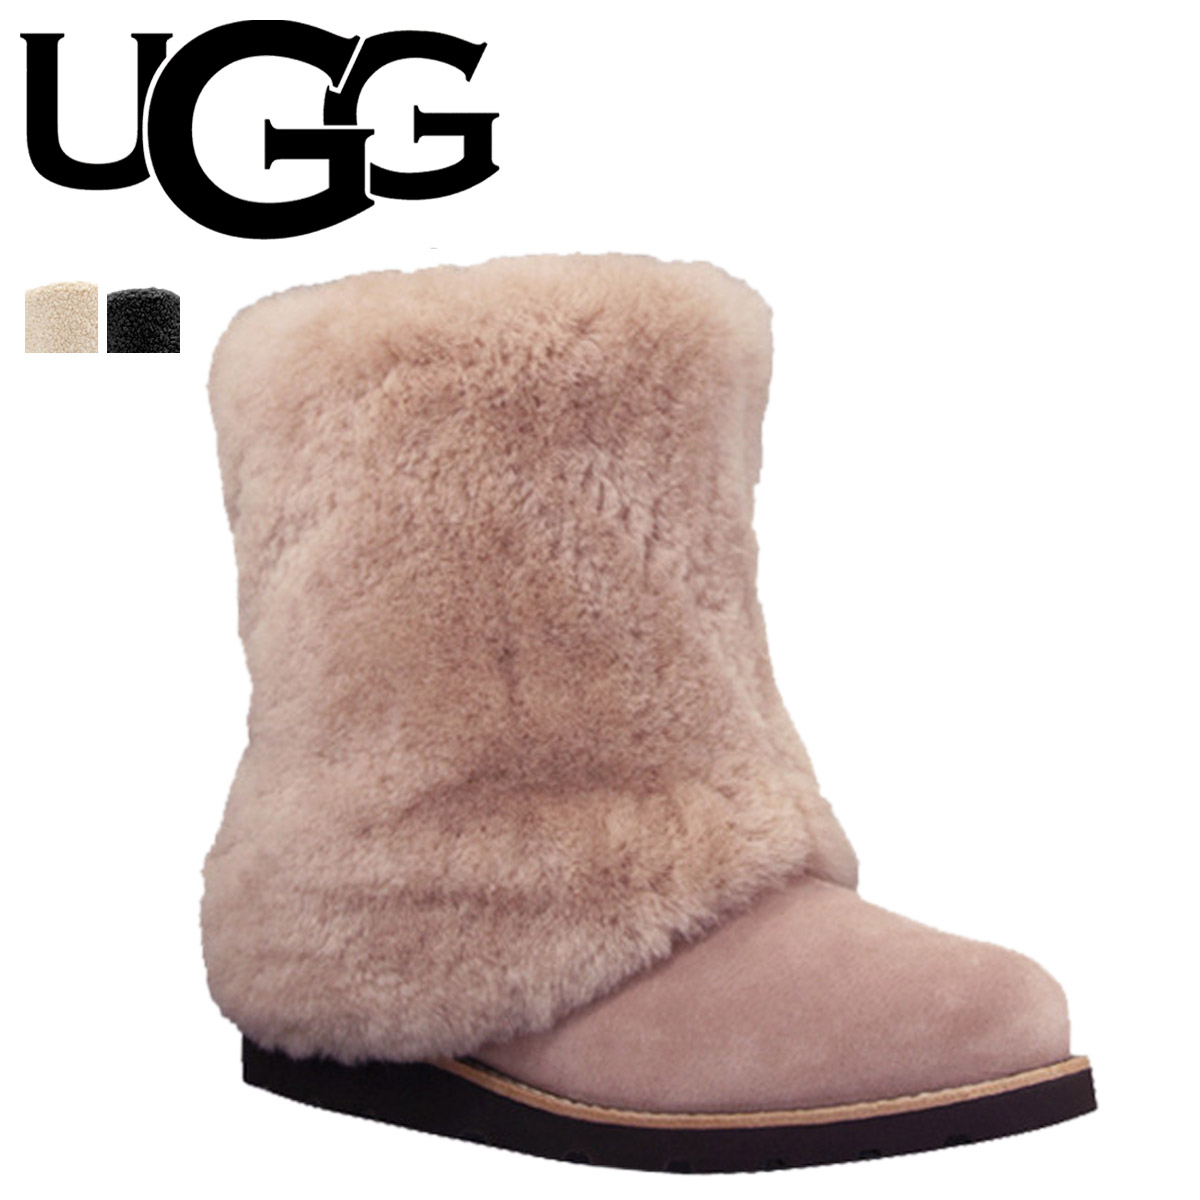 where can i buy uggs near me